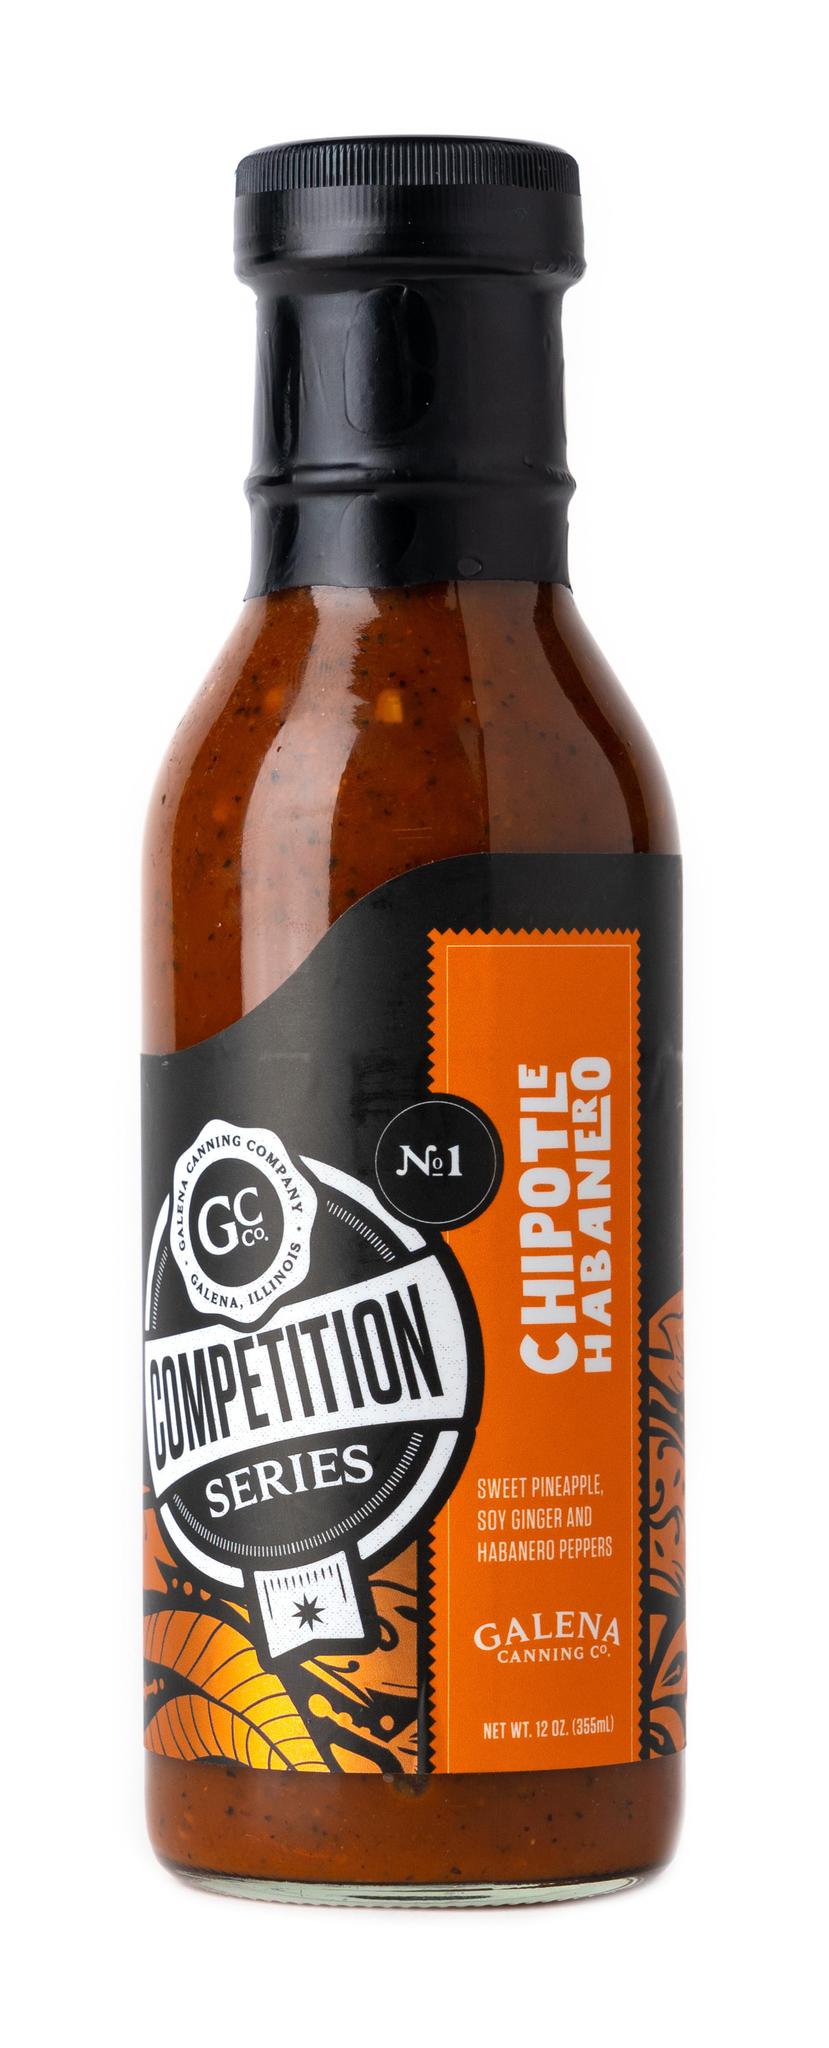 Competition Series Chipotle Habanero Marinade